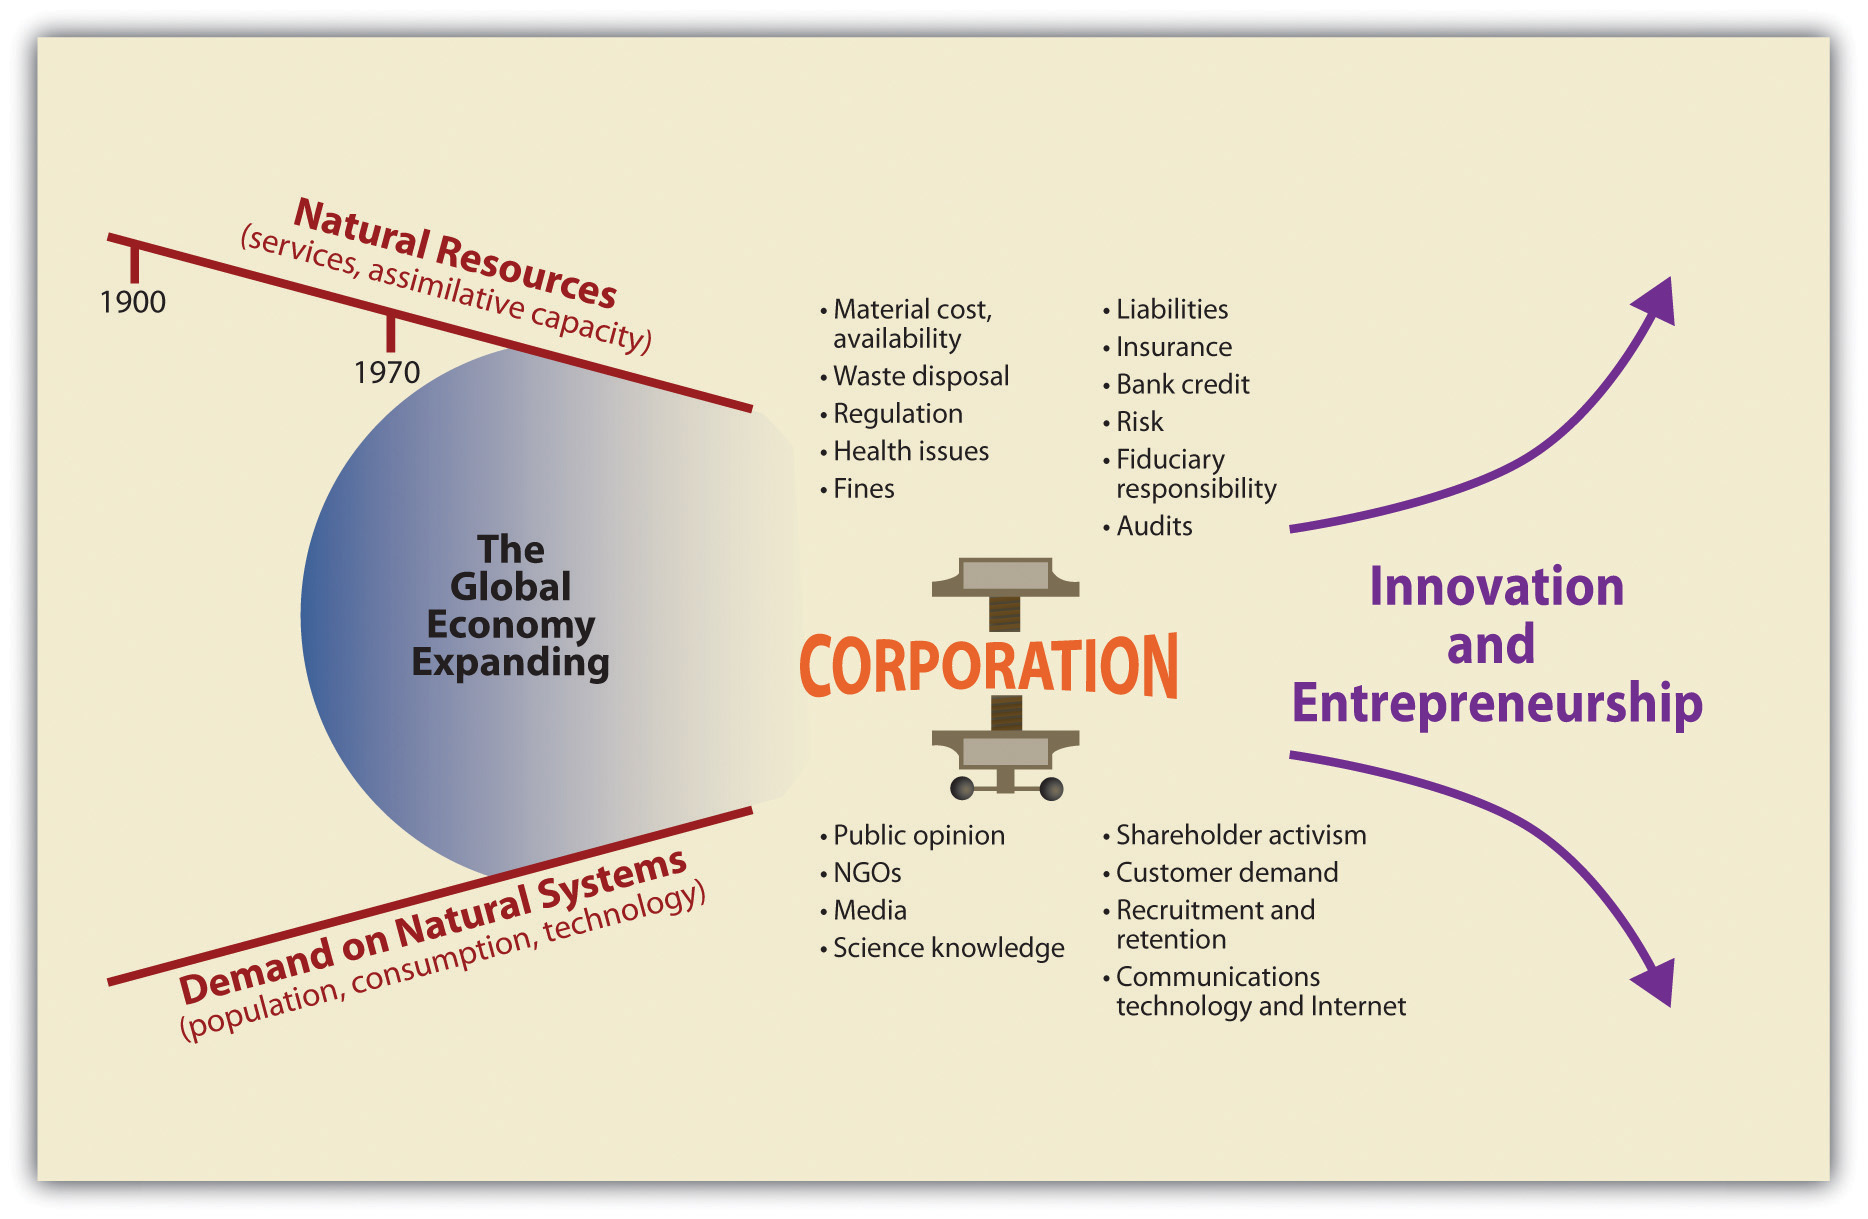 This image shows the Global Economy Expanding changing the corporation that causes people to look at innovation and entrepreneurship.